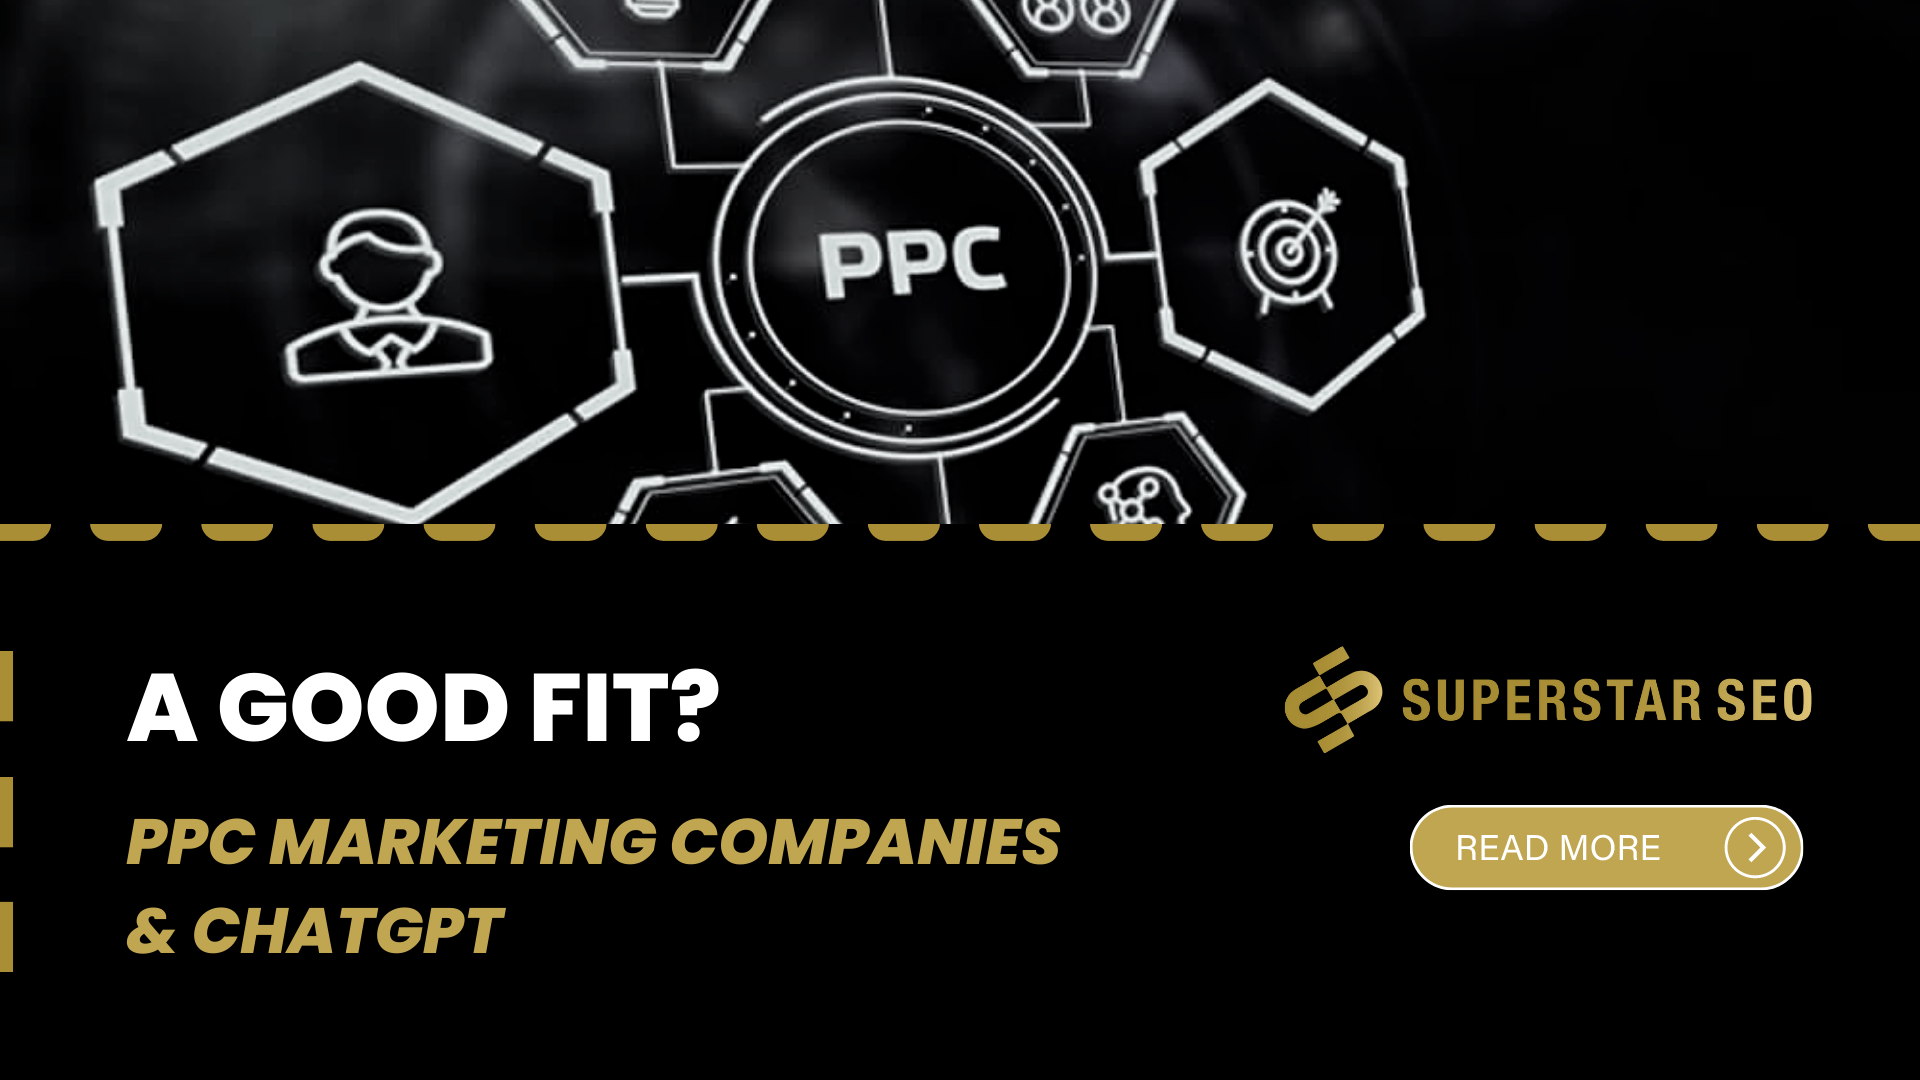 PPC marketing companies and ChatGPT